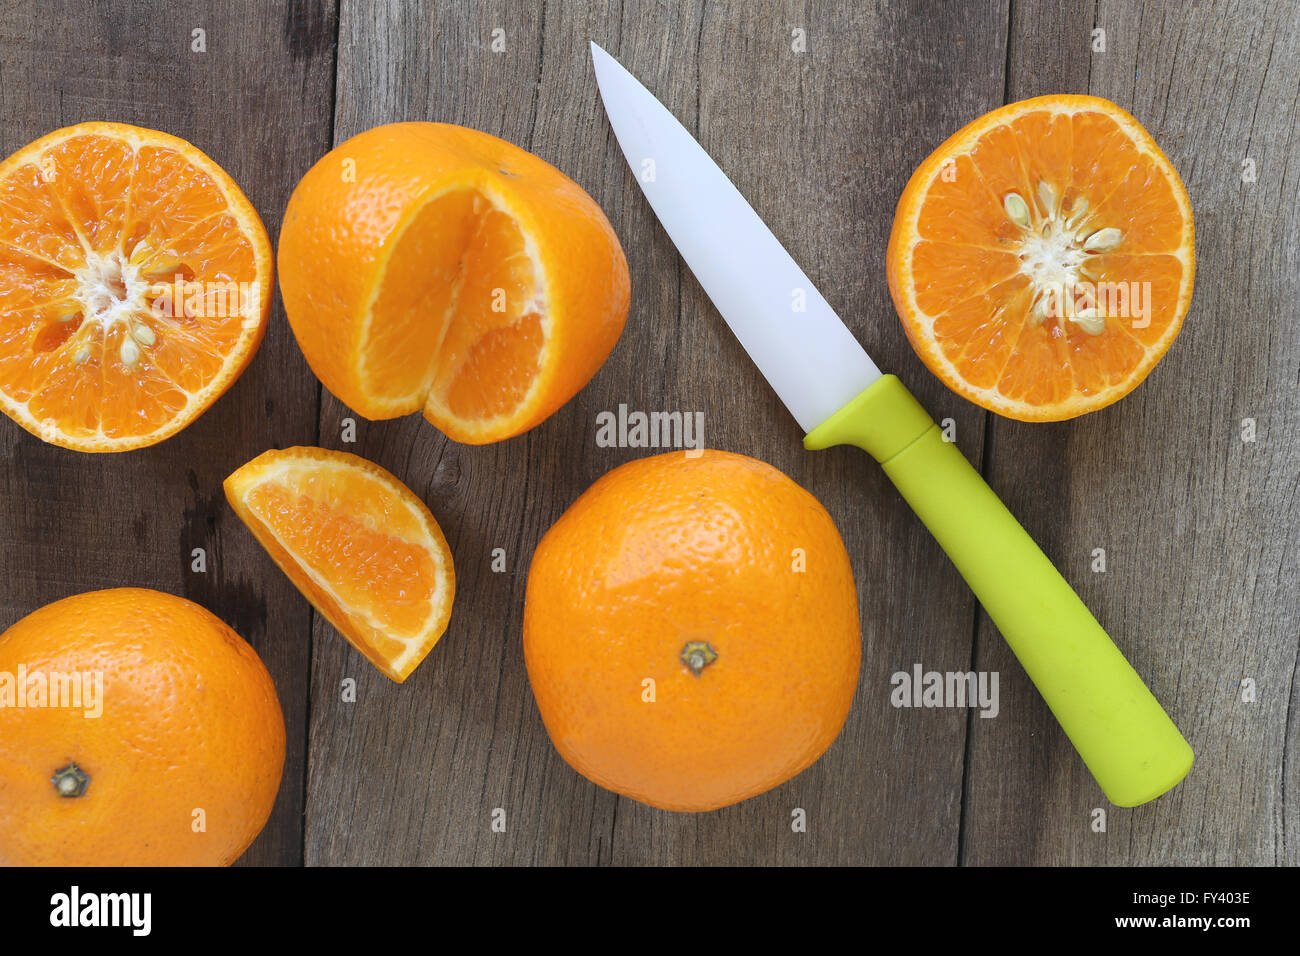 Mandarin oranges and acrylic knife placed on the old wooden floor,design concept for about health foods. Stock Photo